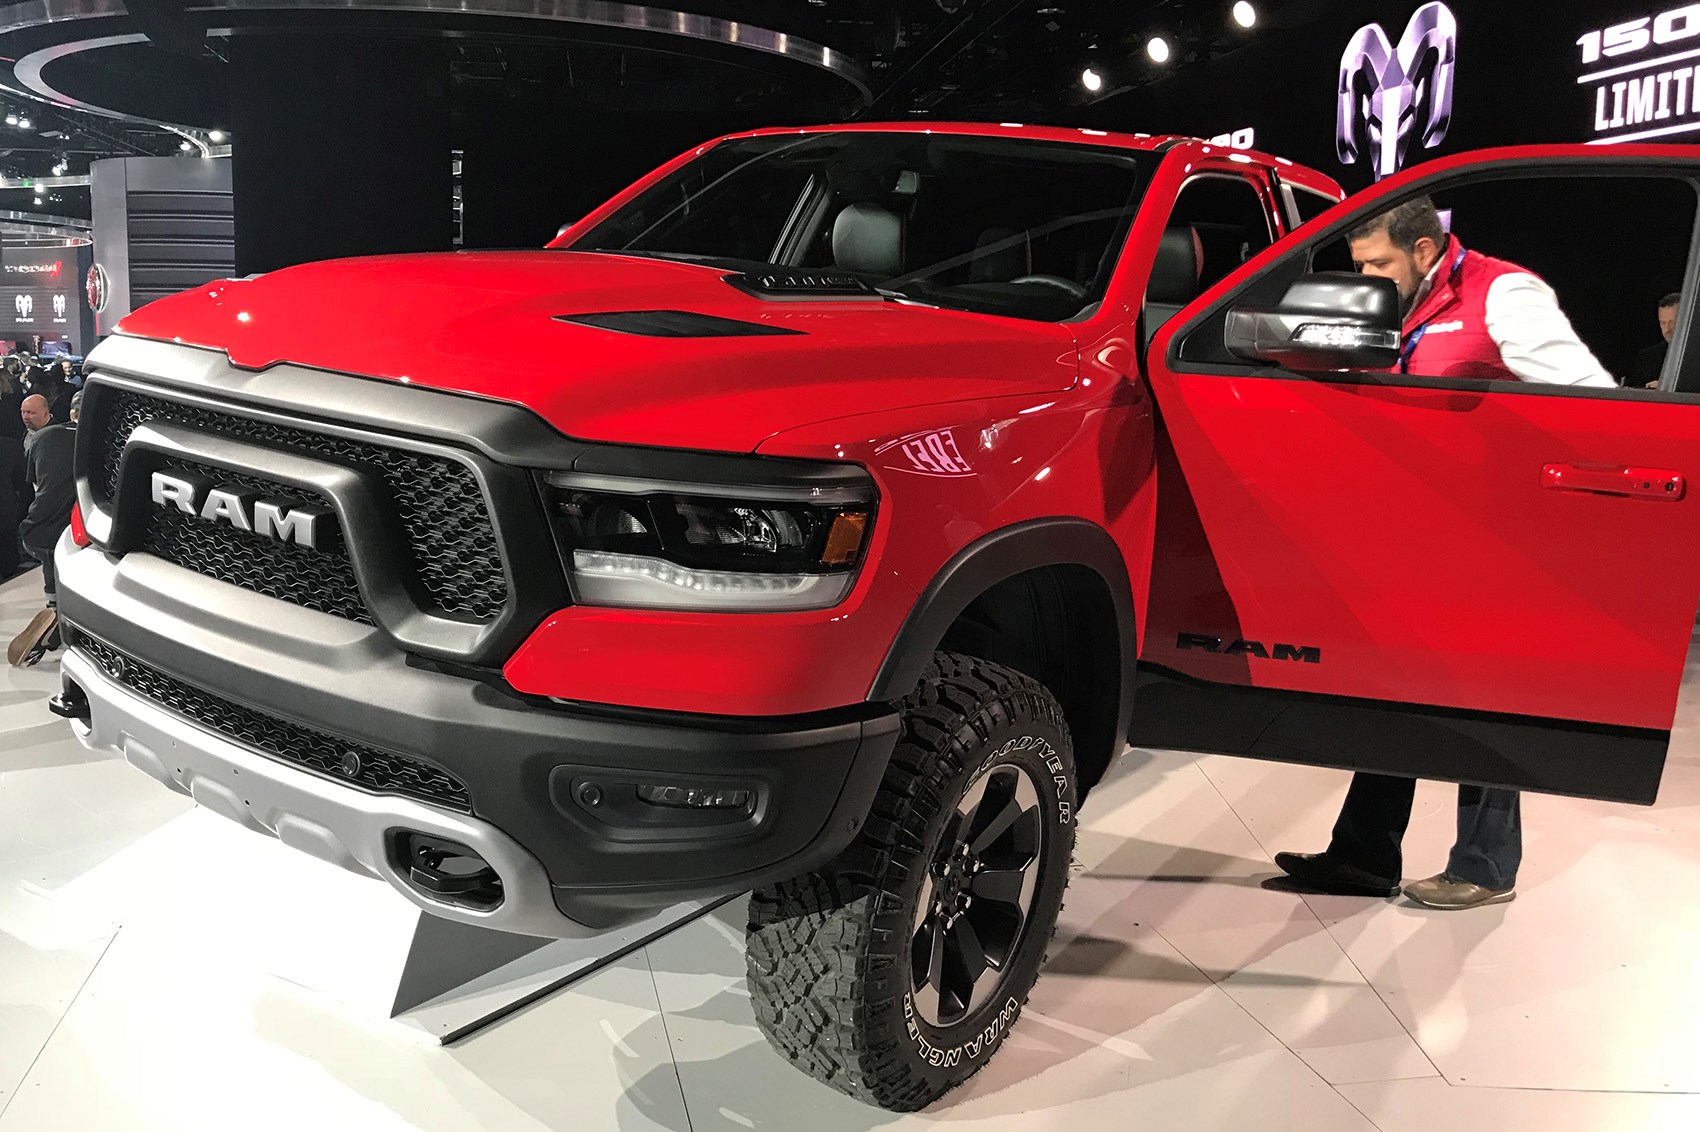 New 2019 Ram 1500 pick-up unveiled: pictures, specs, prices, details | CAR  Magazine